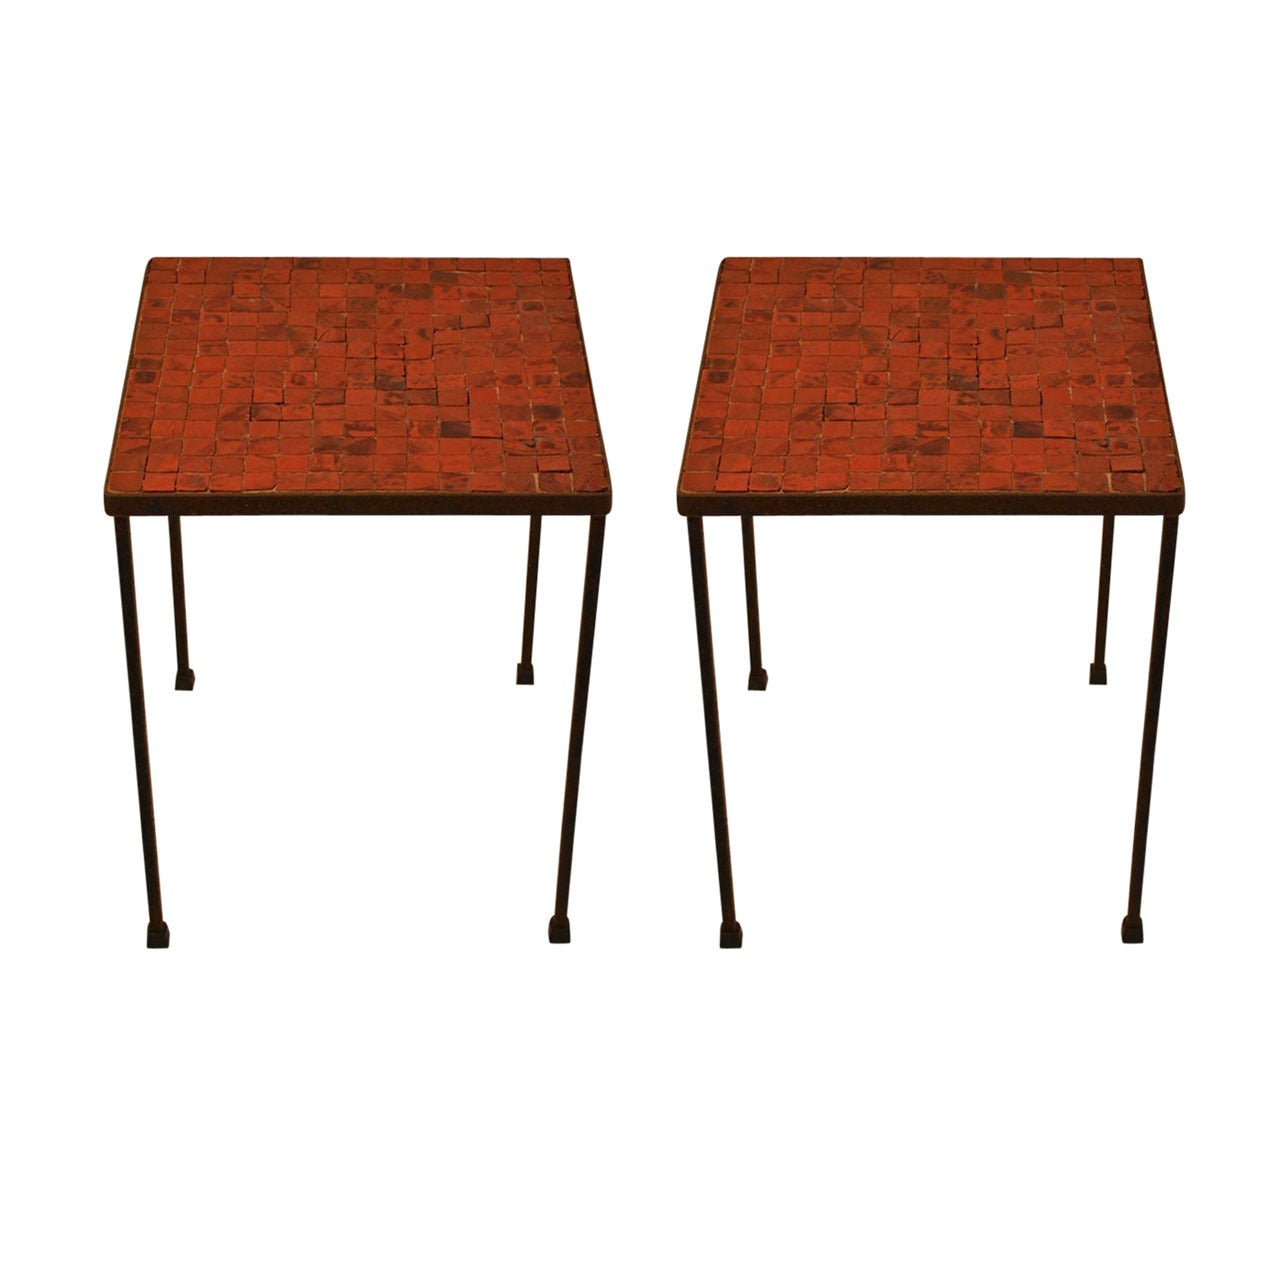 Pair of Square Mosaic Top Modernist Tables